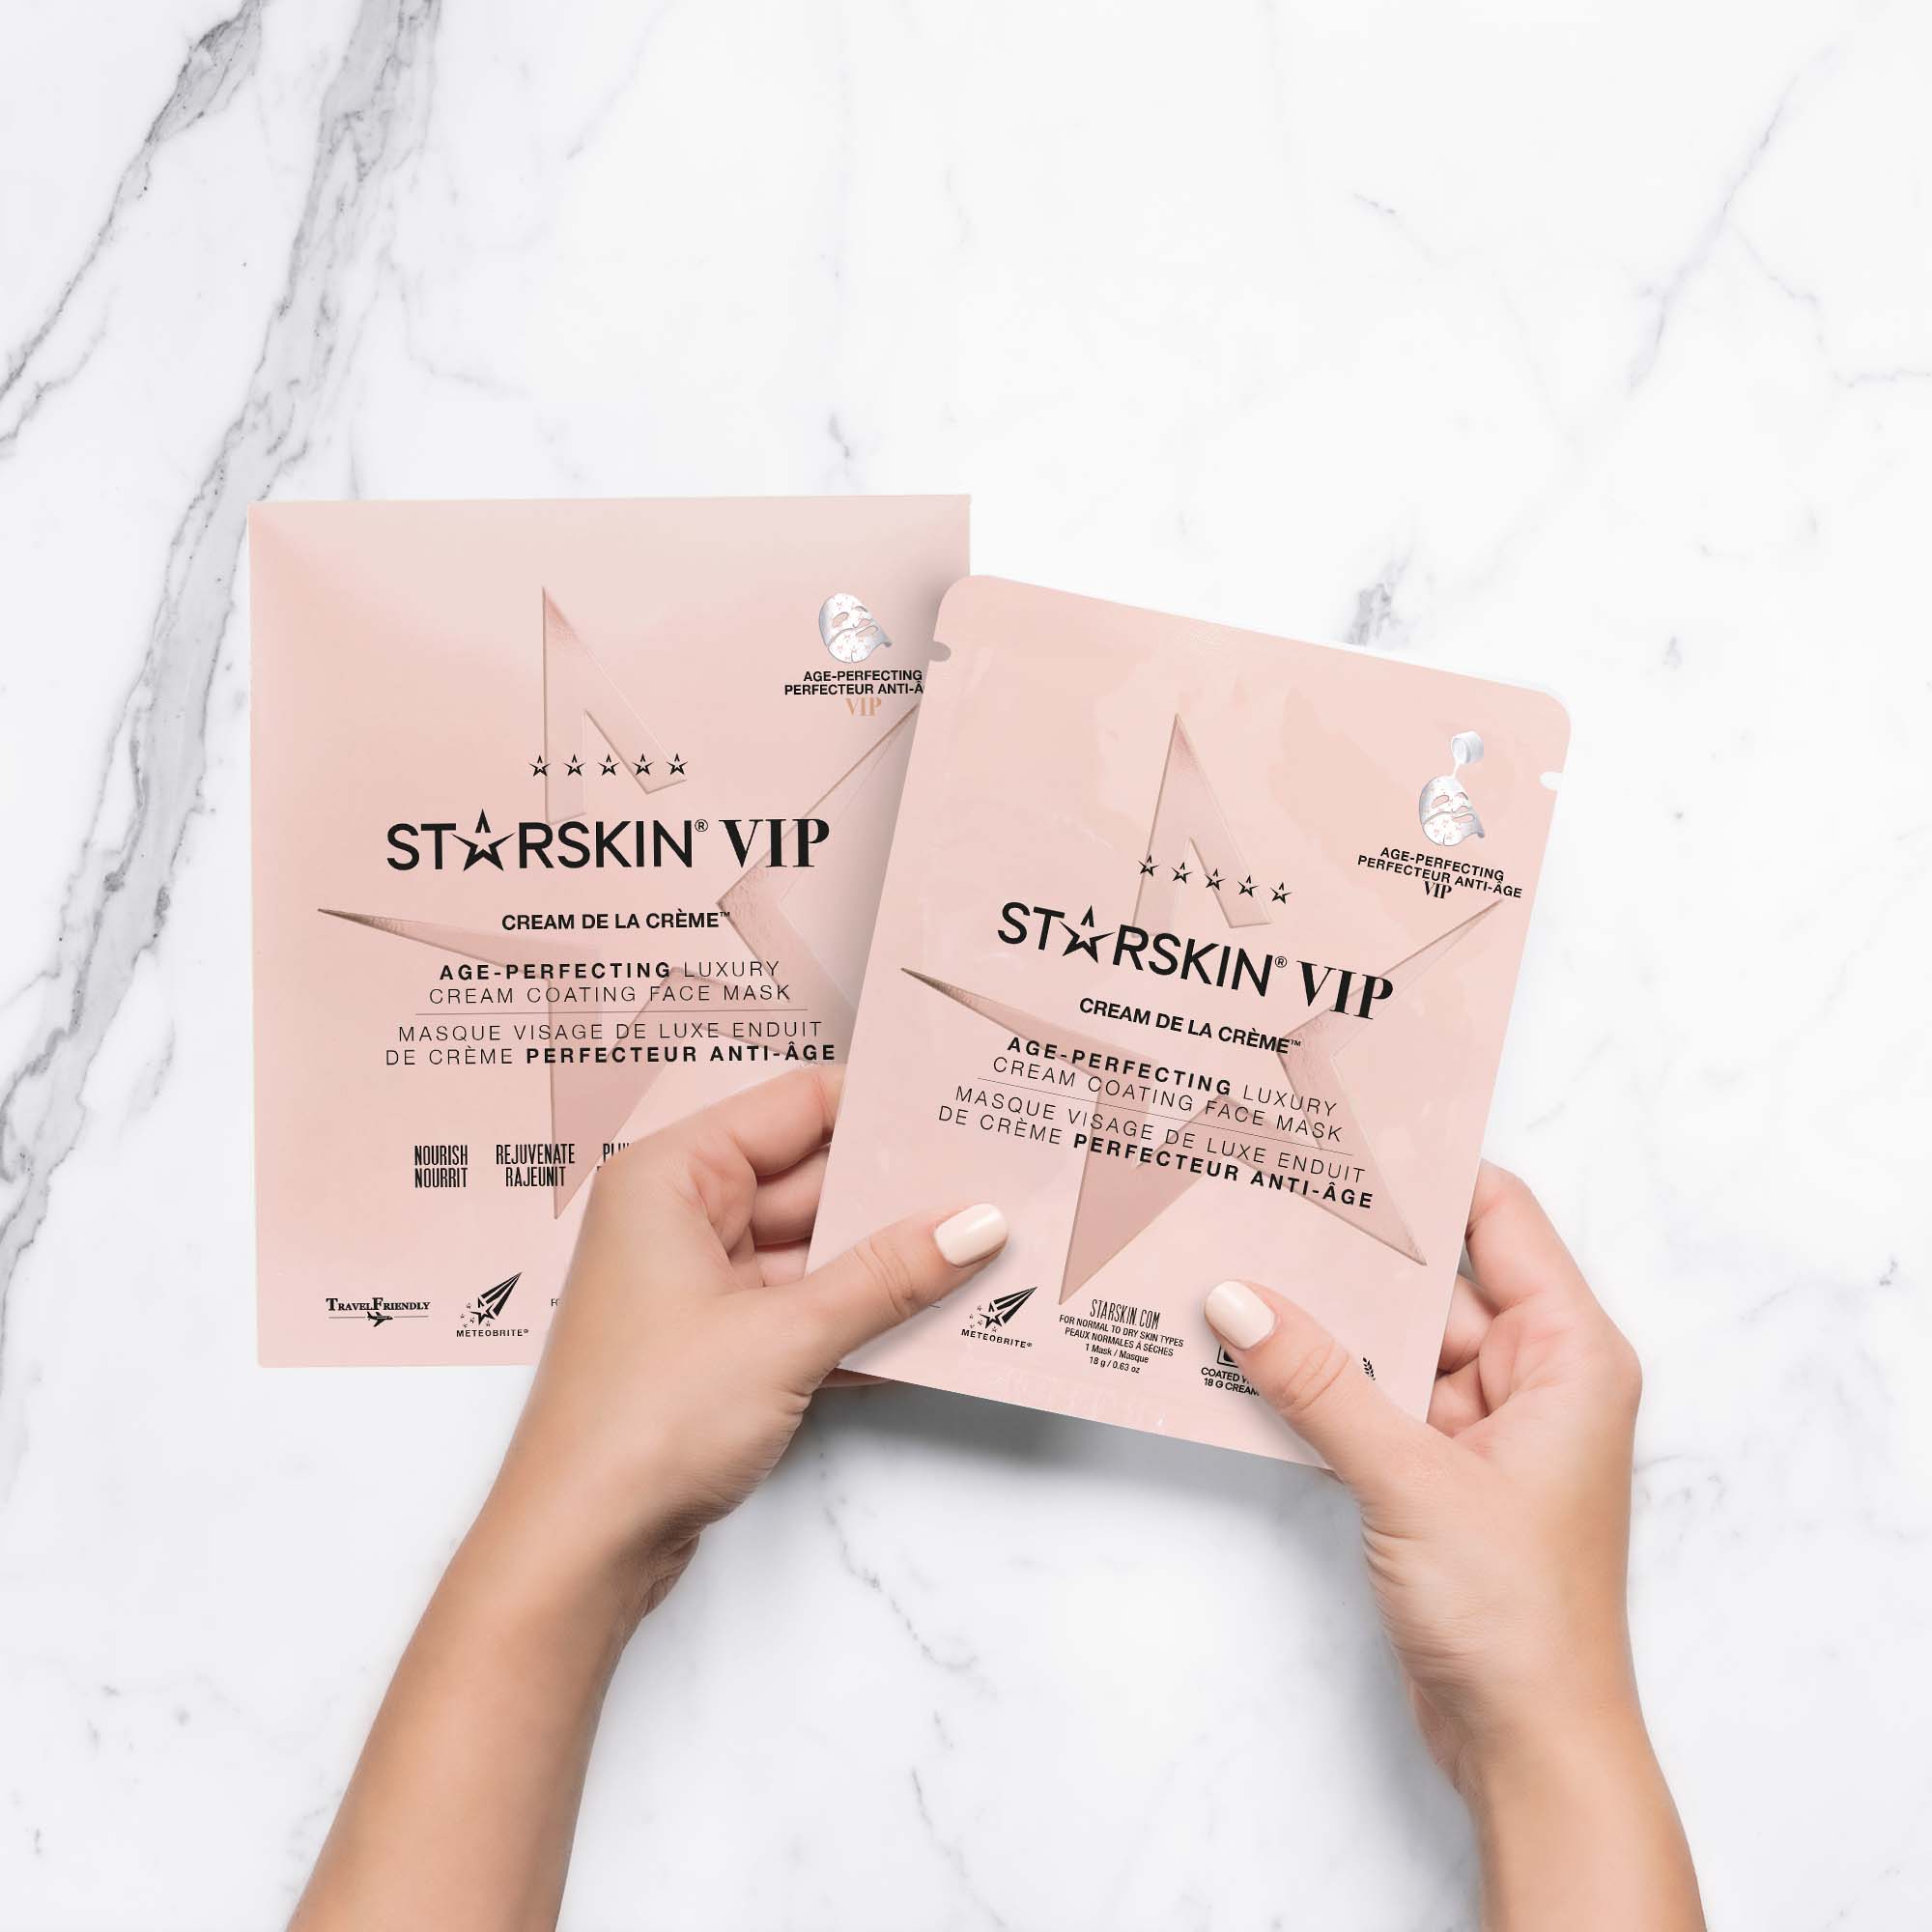 The starskin cream de la creme mask sachet is being held by someone. Underneath the sachet is the normal product packaging. The image has a marble background. 